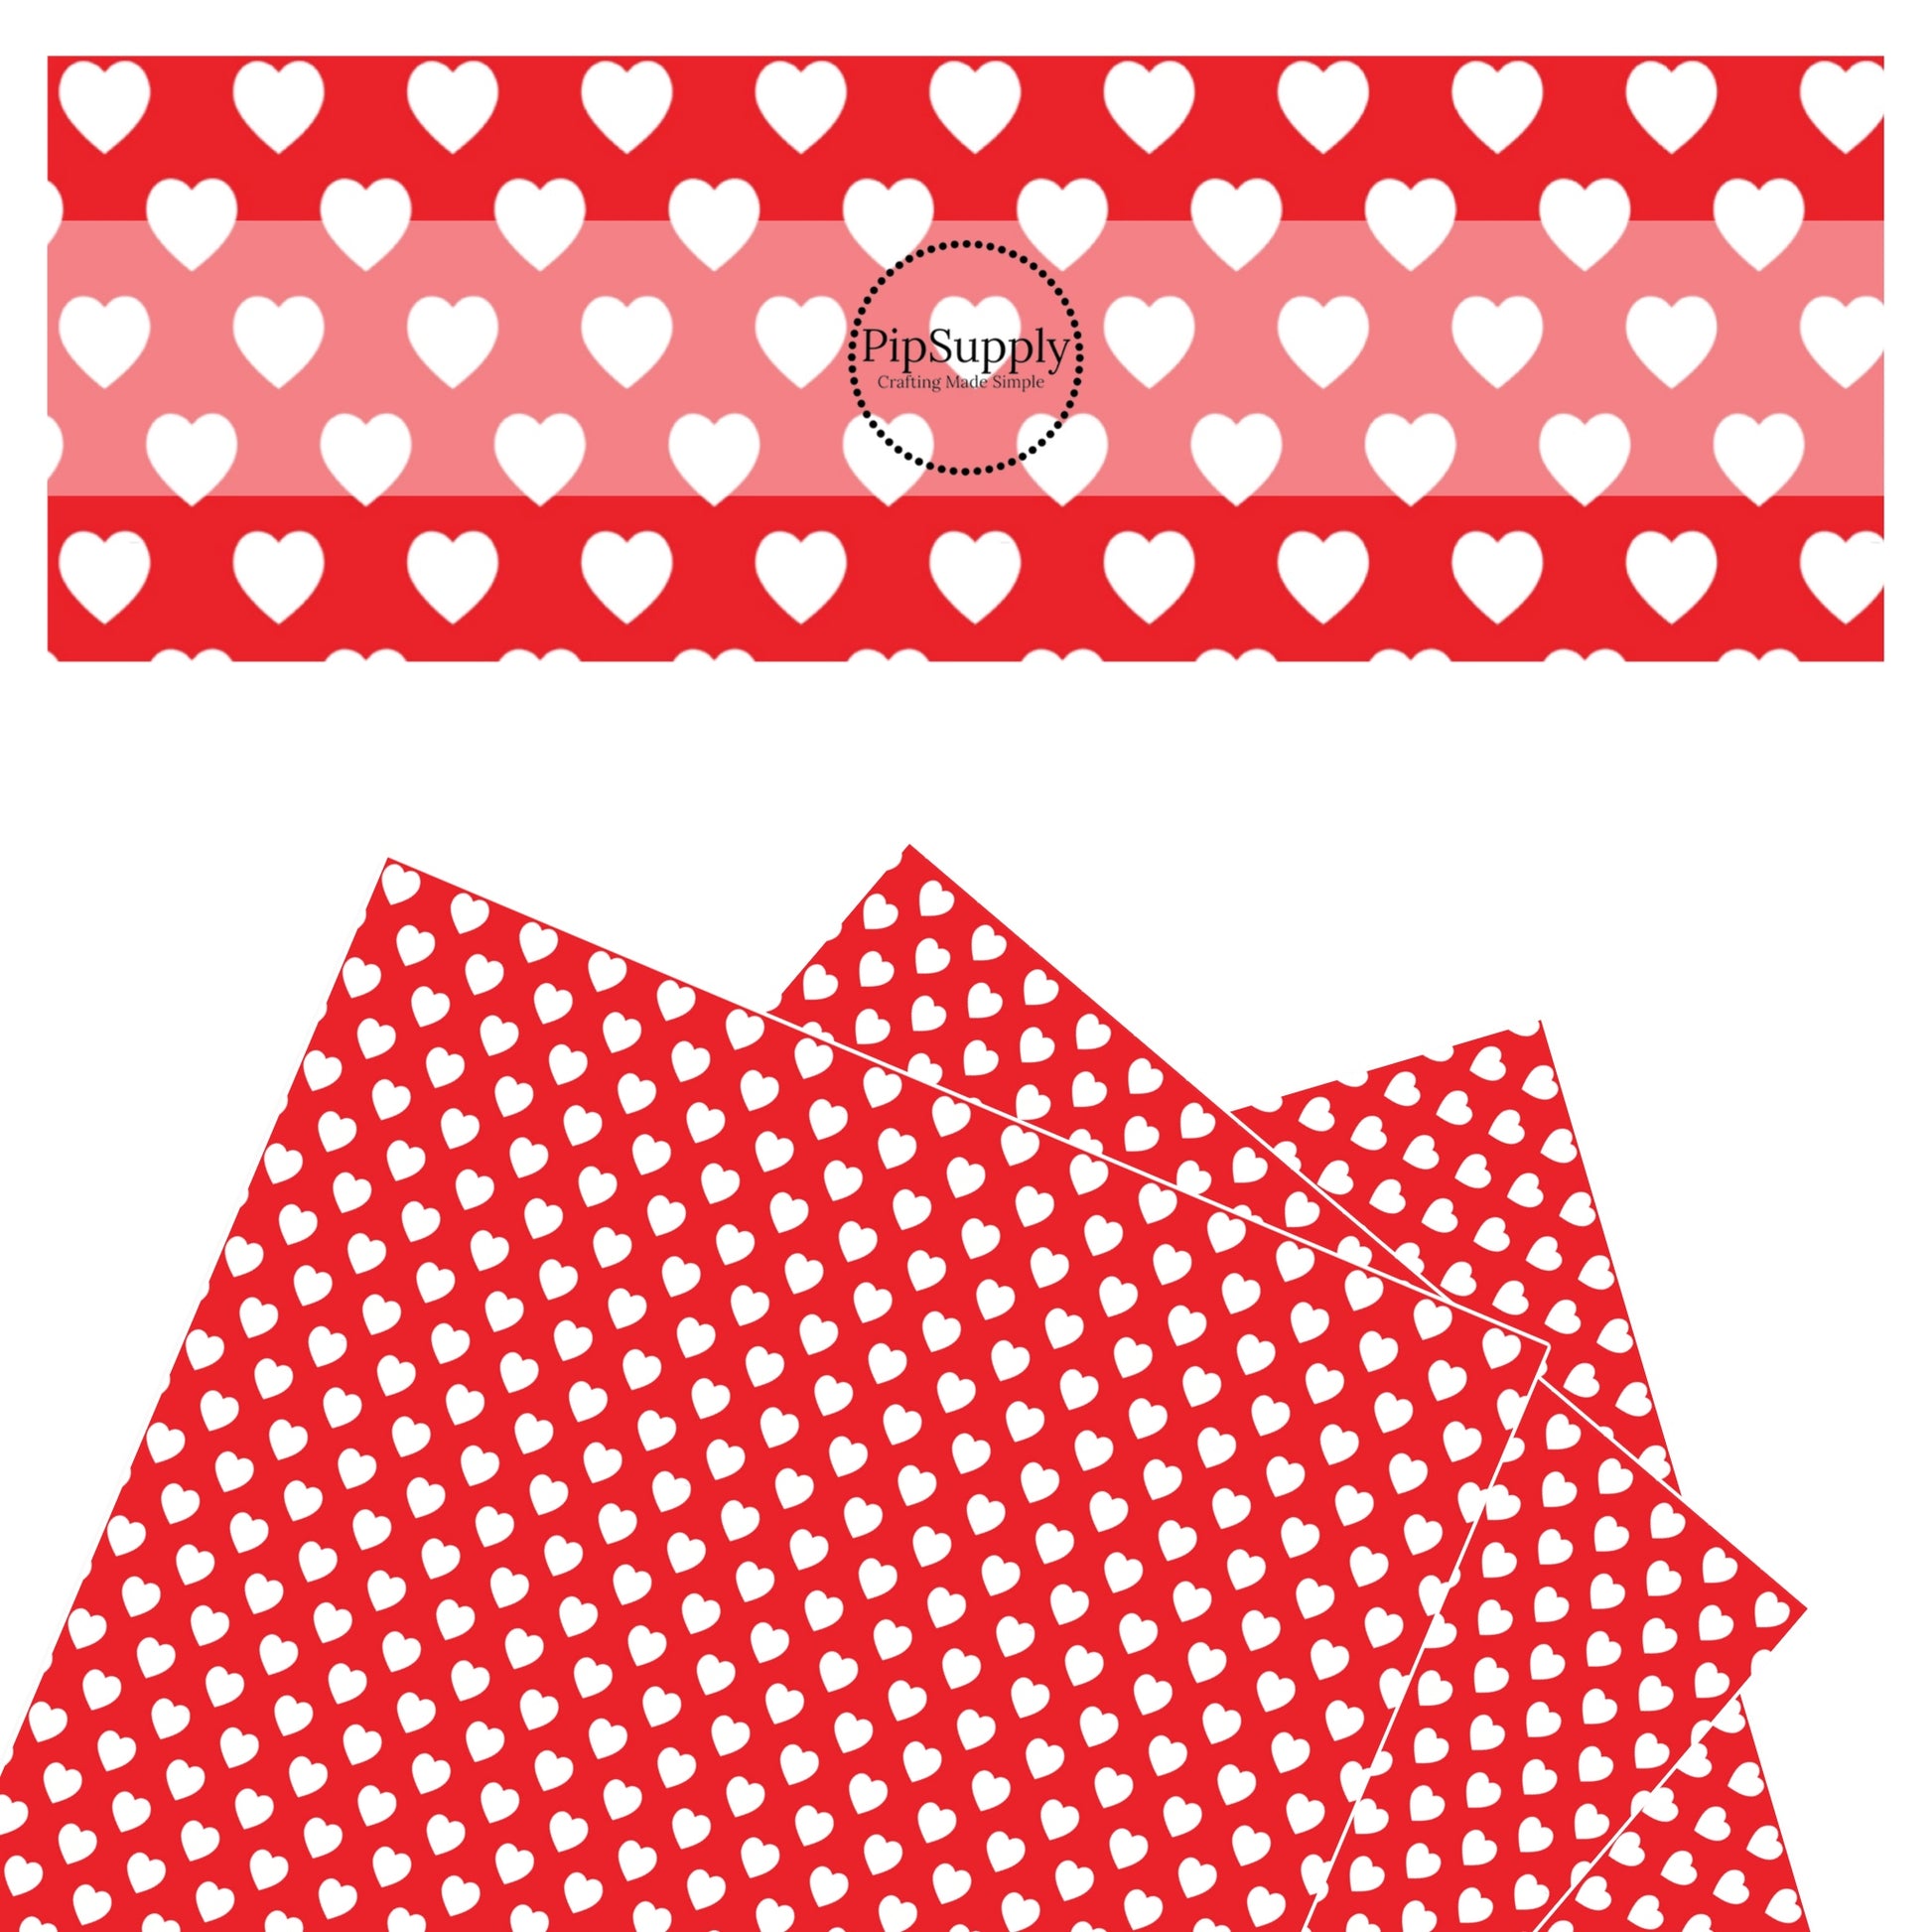 White hearts on a cherry red faux leather sheet